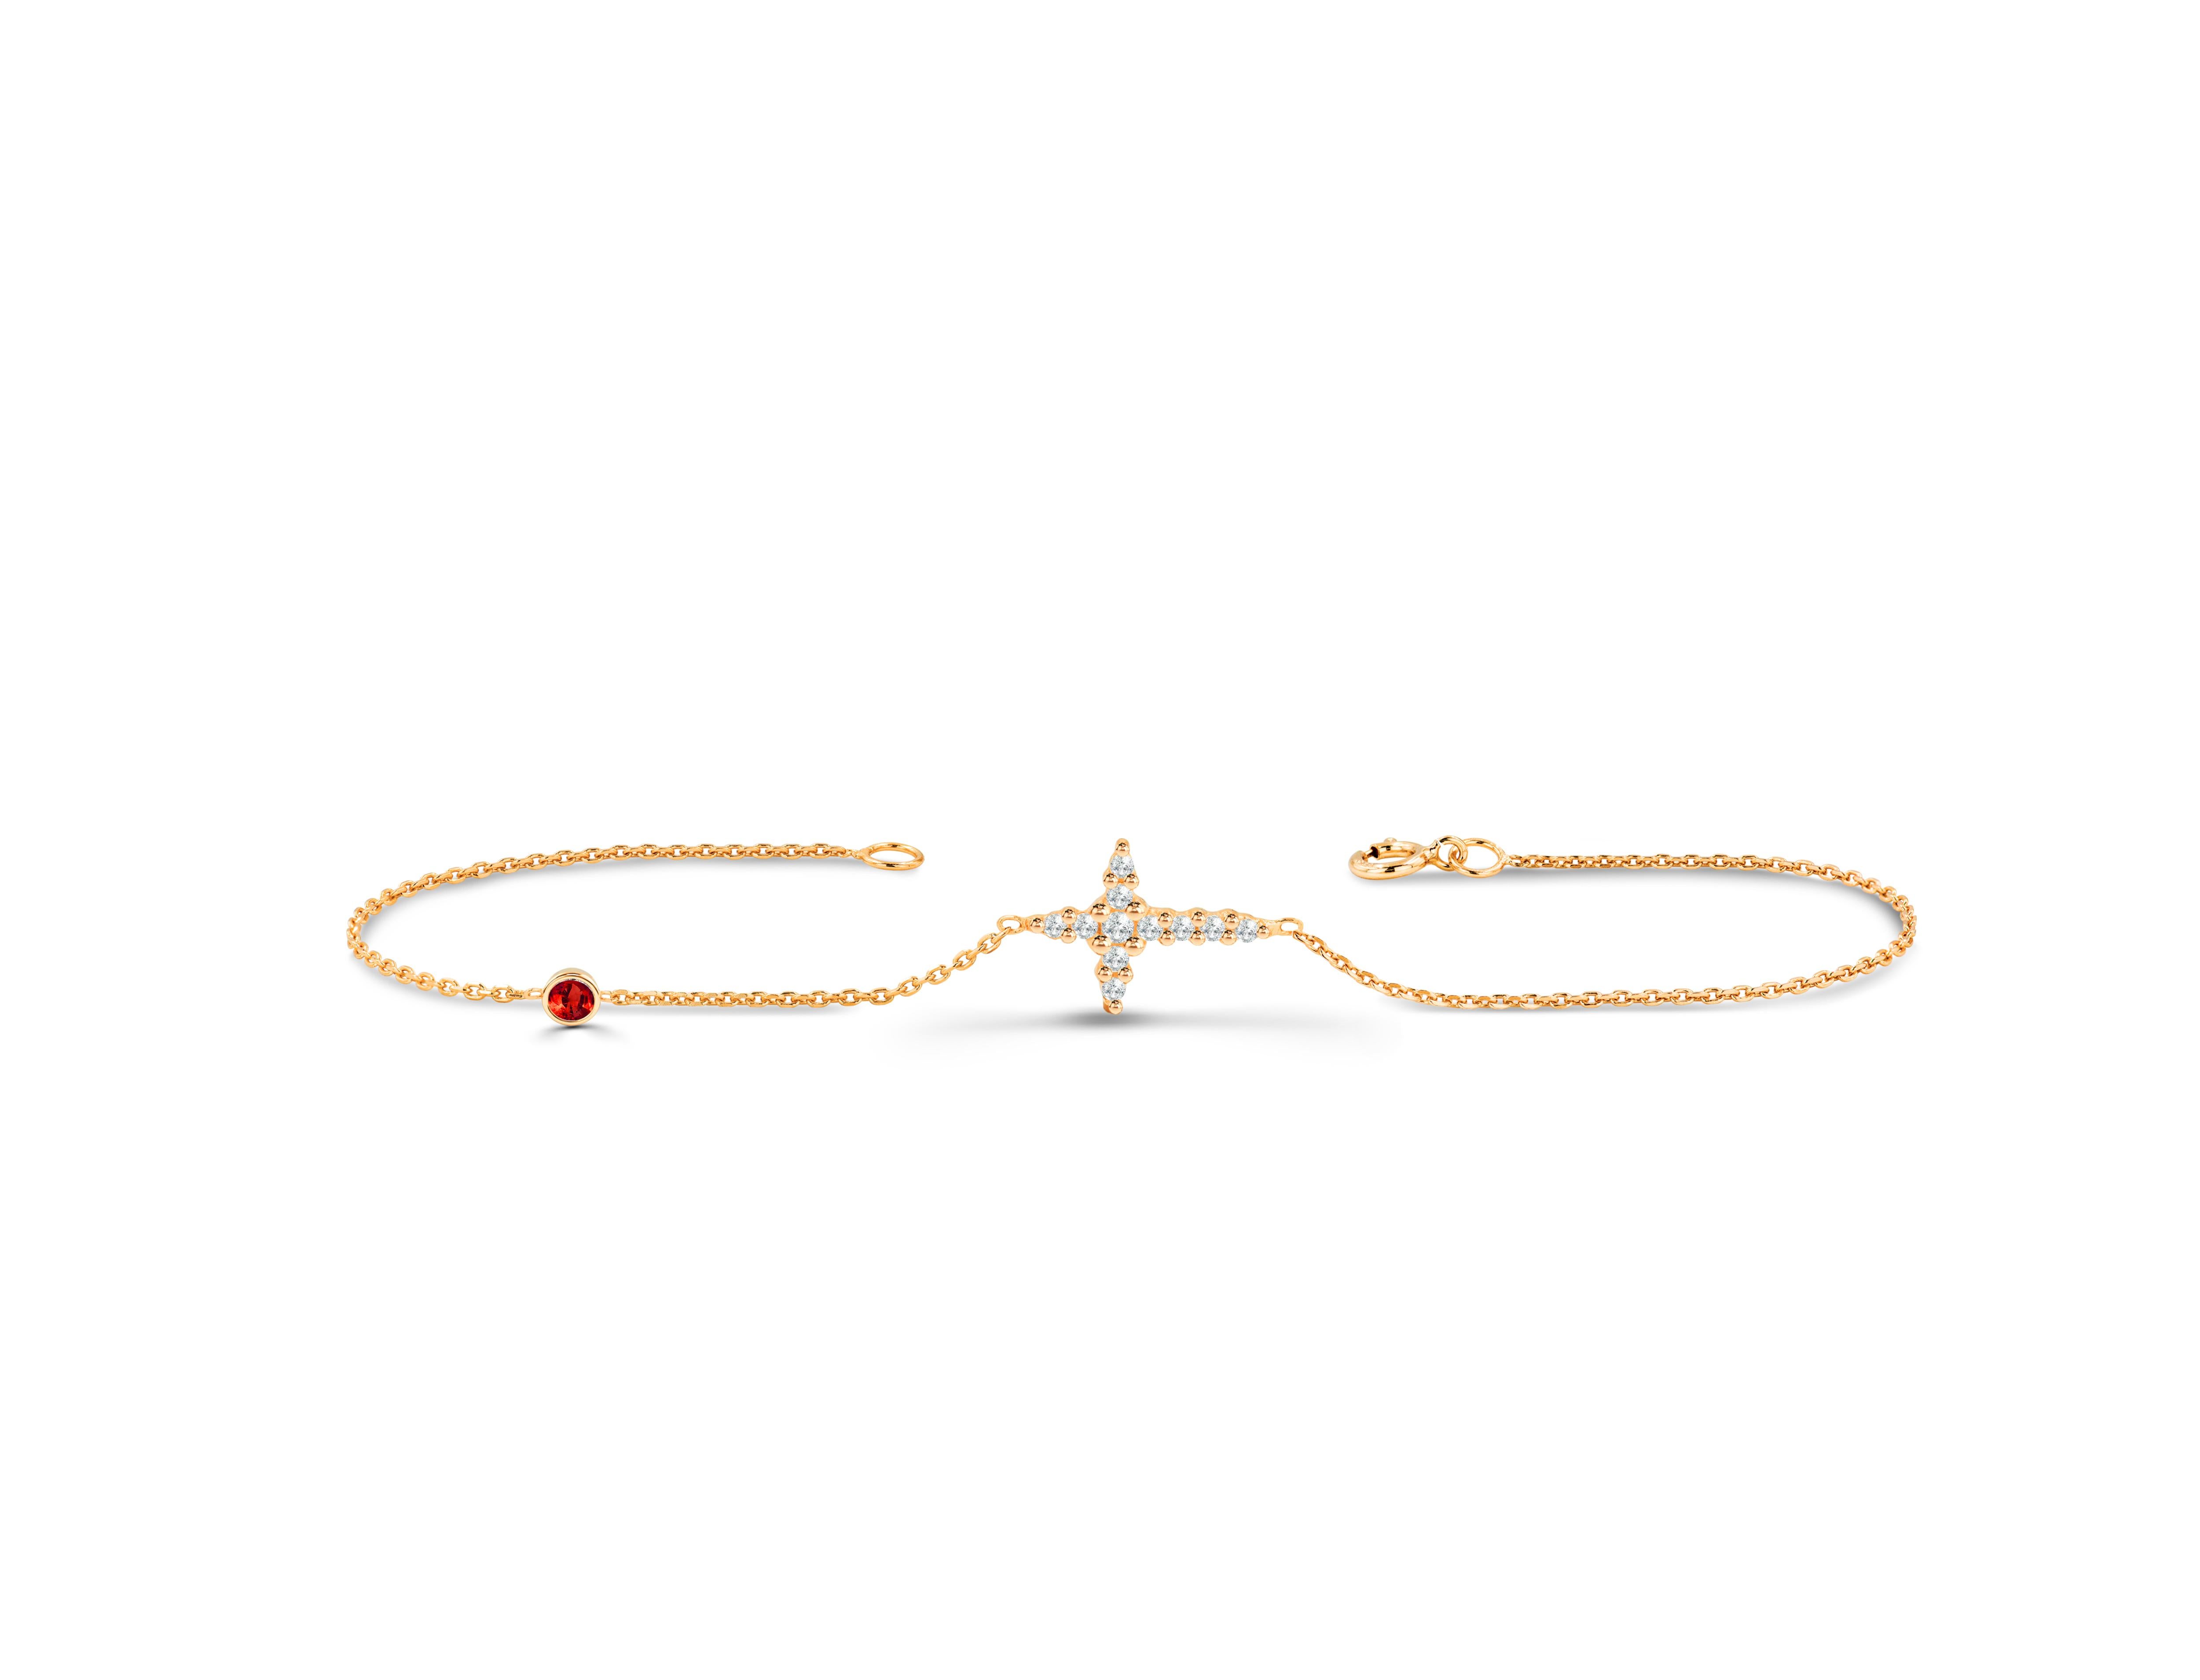 0.13 Carat diamond sideway Cross bracelet is a perfect religious bracelet and is meant for you to feel good and protected whenever worn. This bracelet comes with a customizable precious stone of your choice attached to the side - Emerald, Ruby or